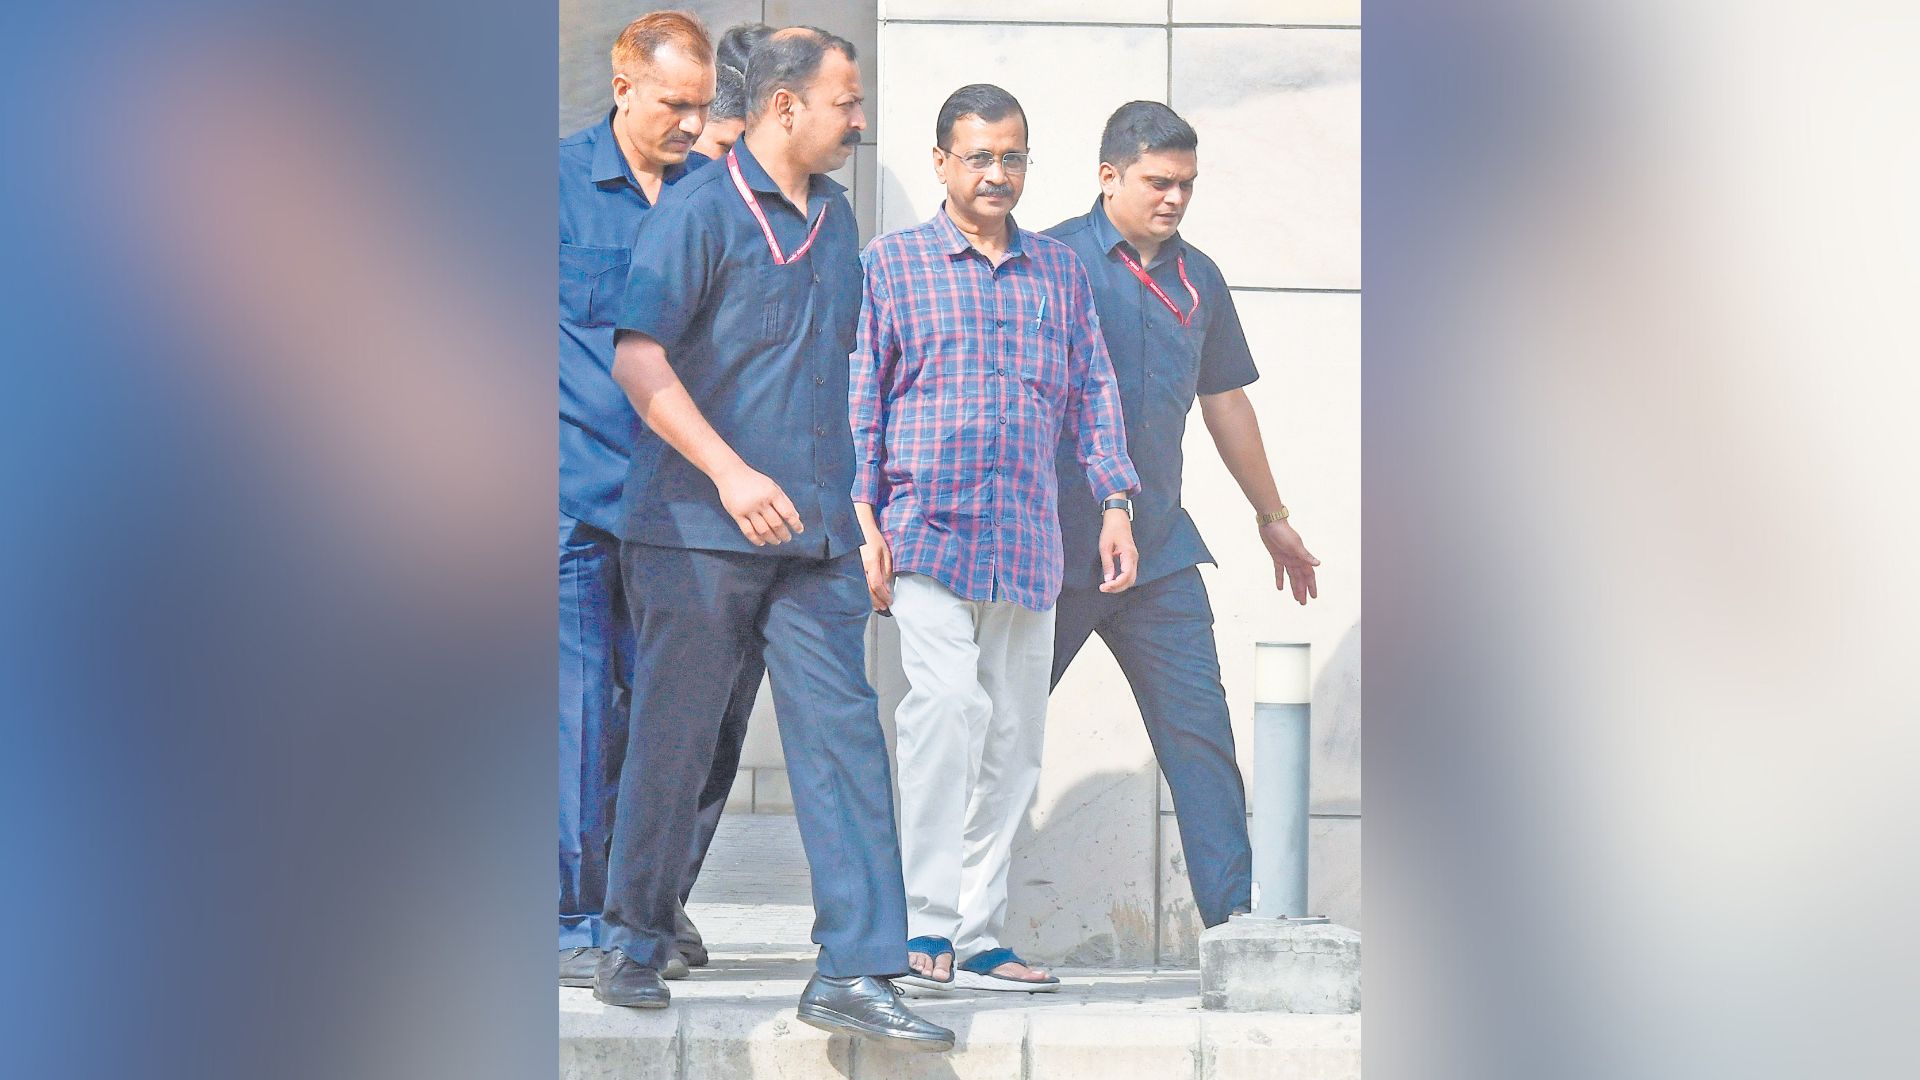 Delhi Chief Minister Arvind Kejriwal leaves Rouse Avenue Court in New Delhi after being produced by ED in Delhi Excise Policy case on Thursday. (ANI Photo)